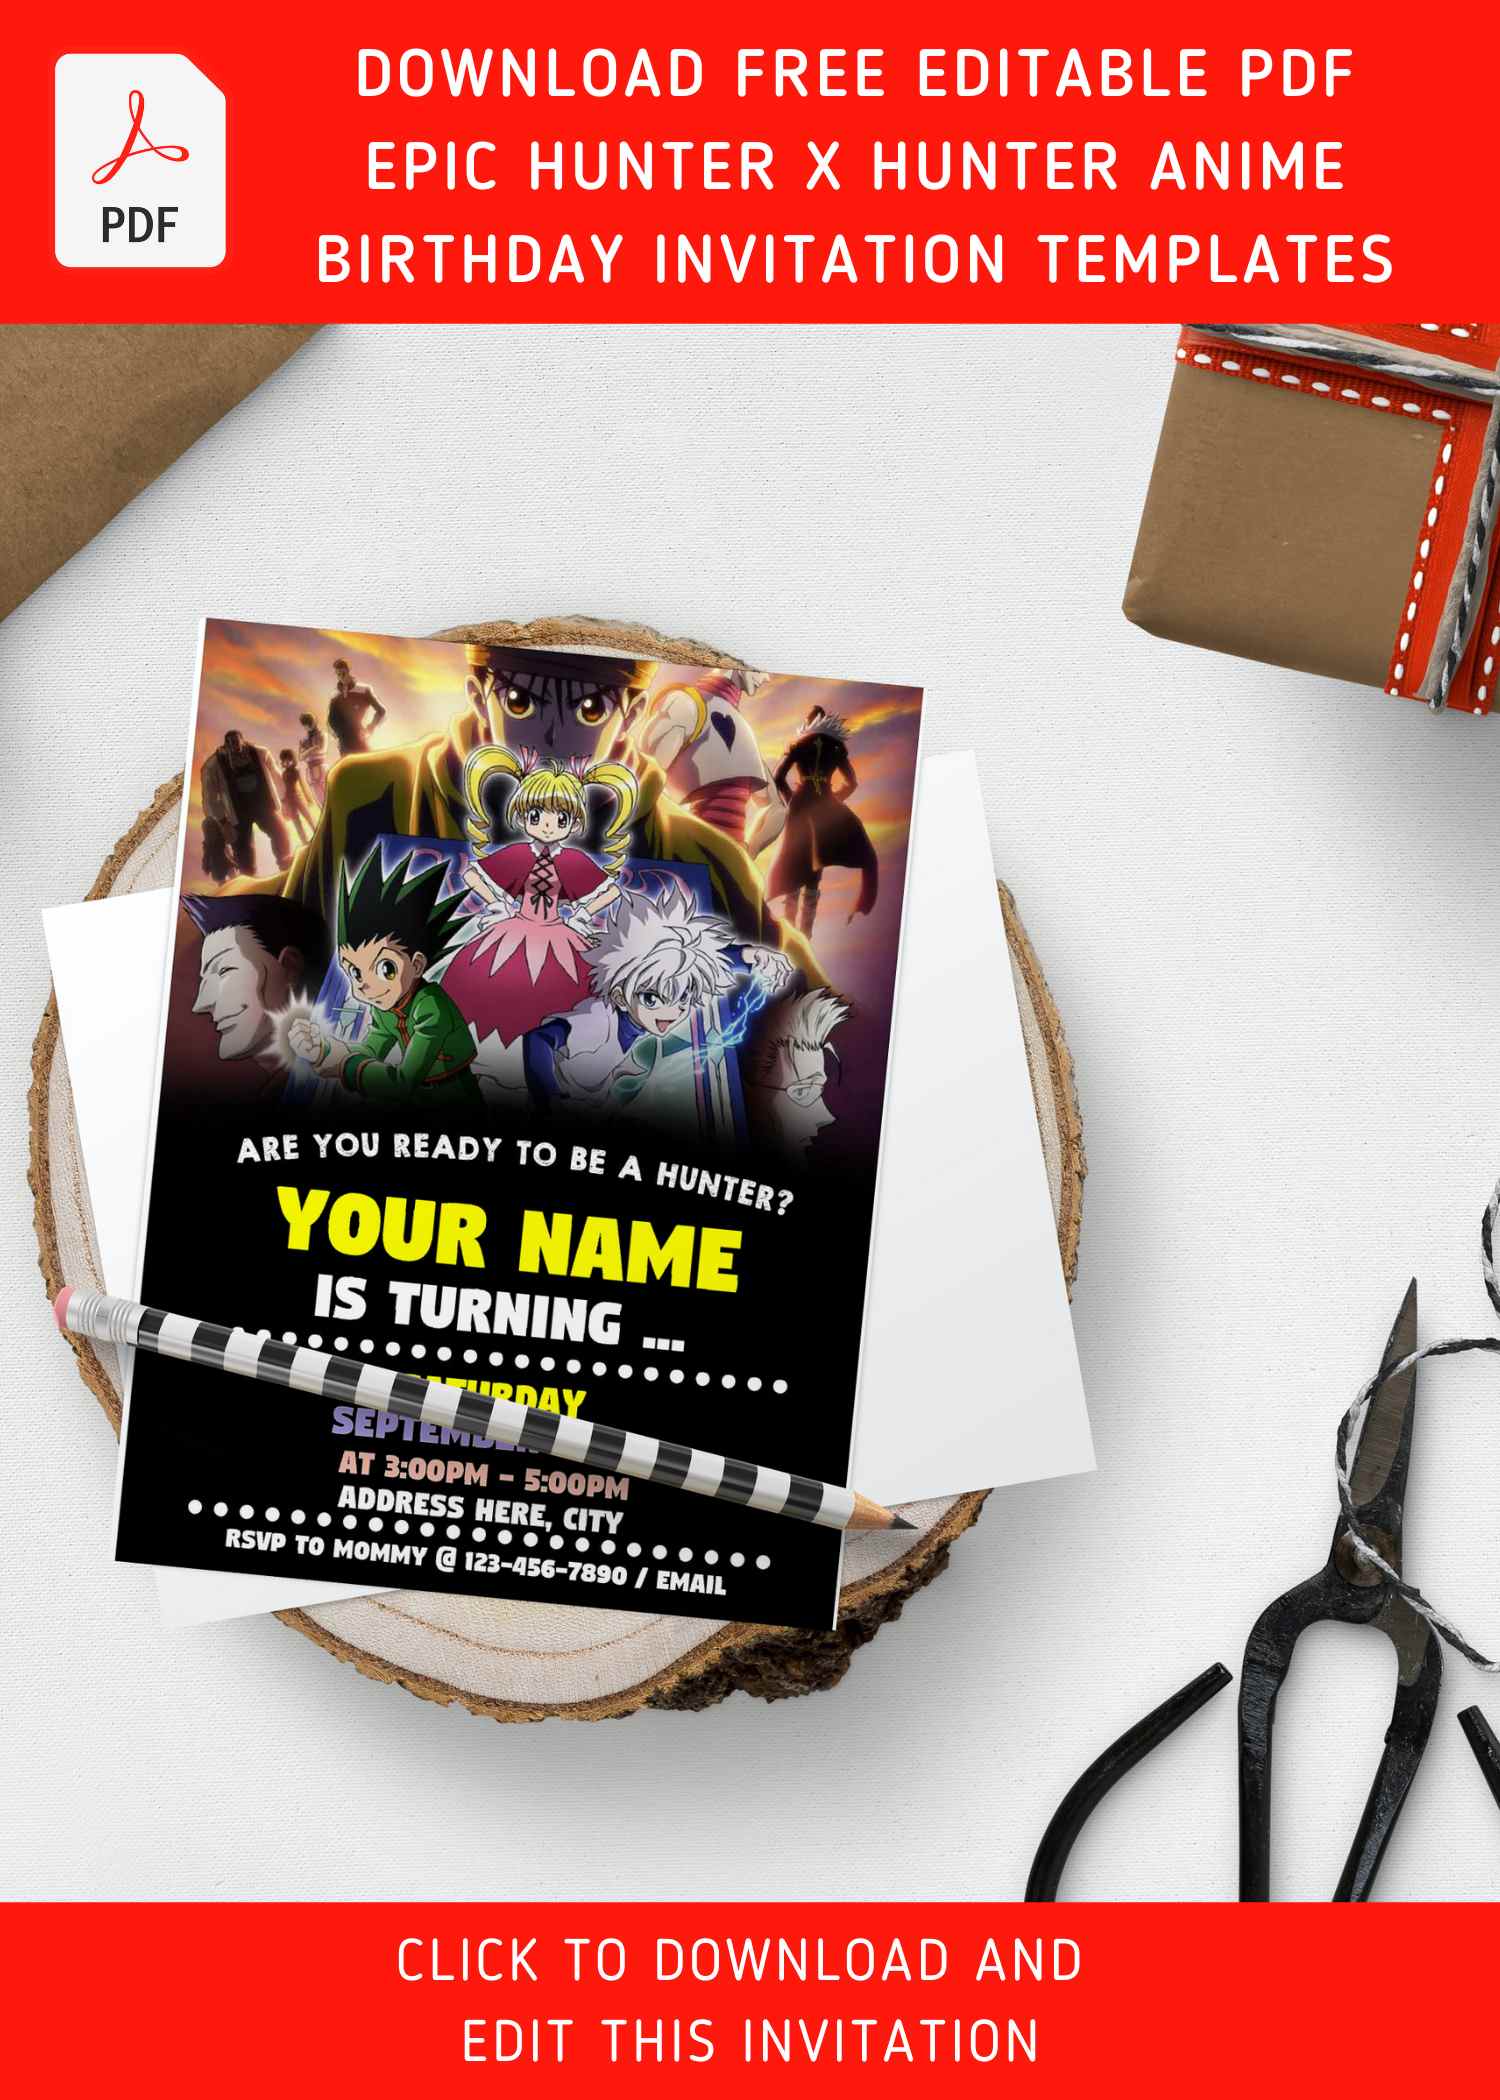 Novel Concept Designs  Death Note  Anime  Birthday Party  Invitation